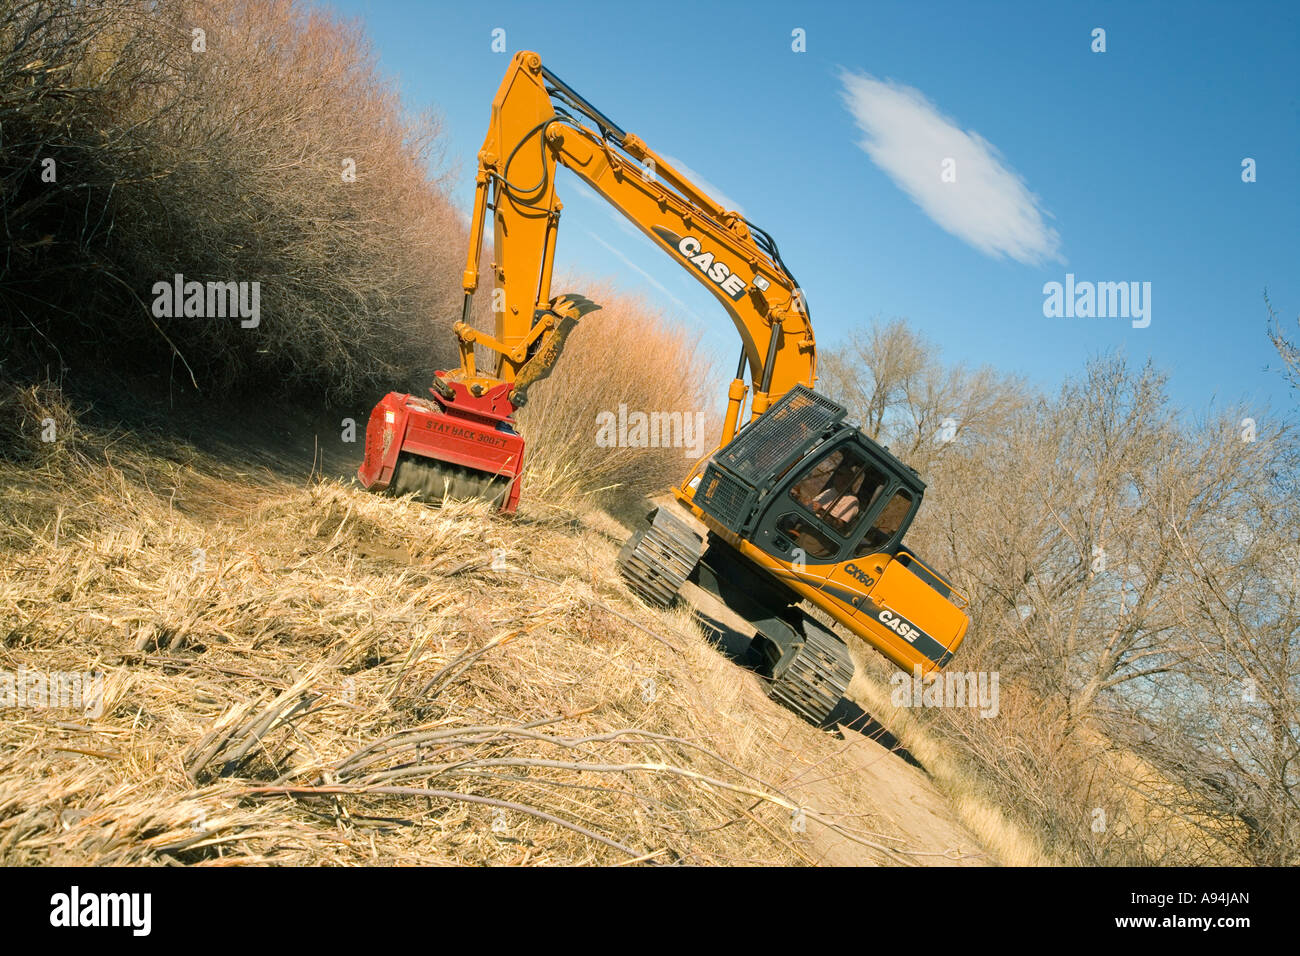 Case Excavator using brush cutter to clean agricultural irrigation ditch, Nevada Stock Photo